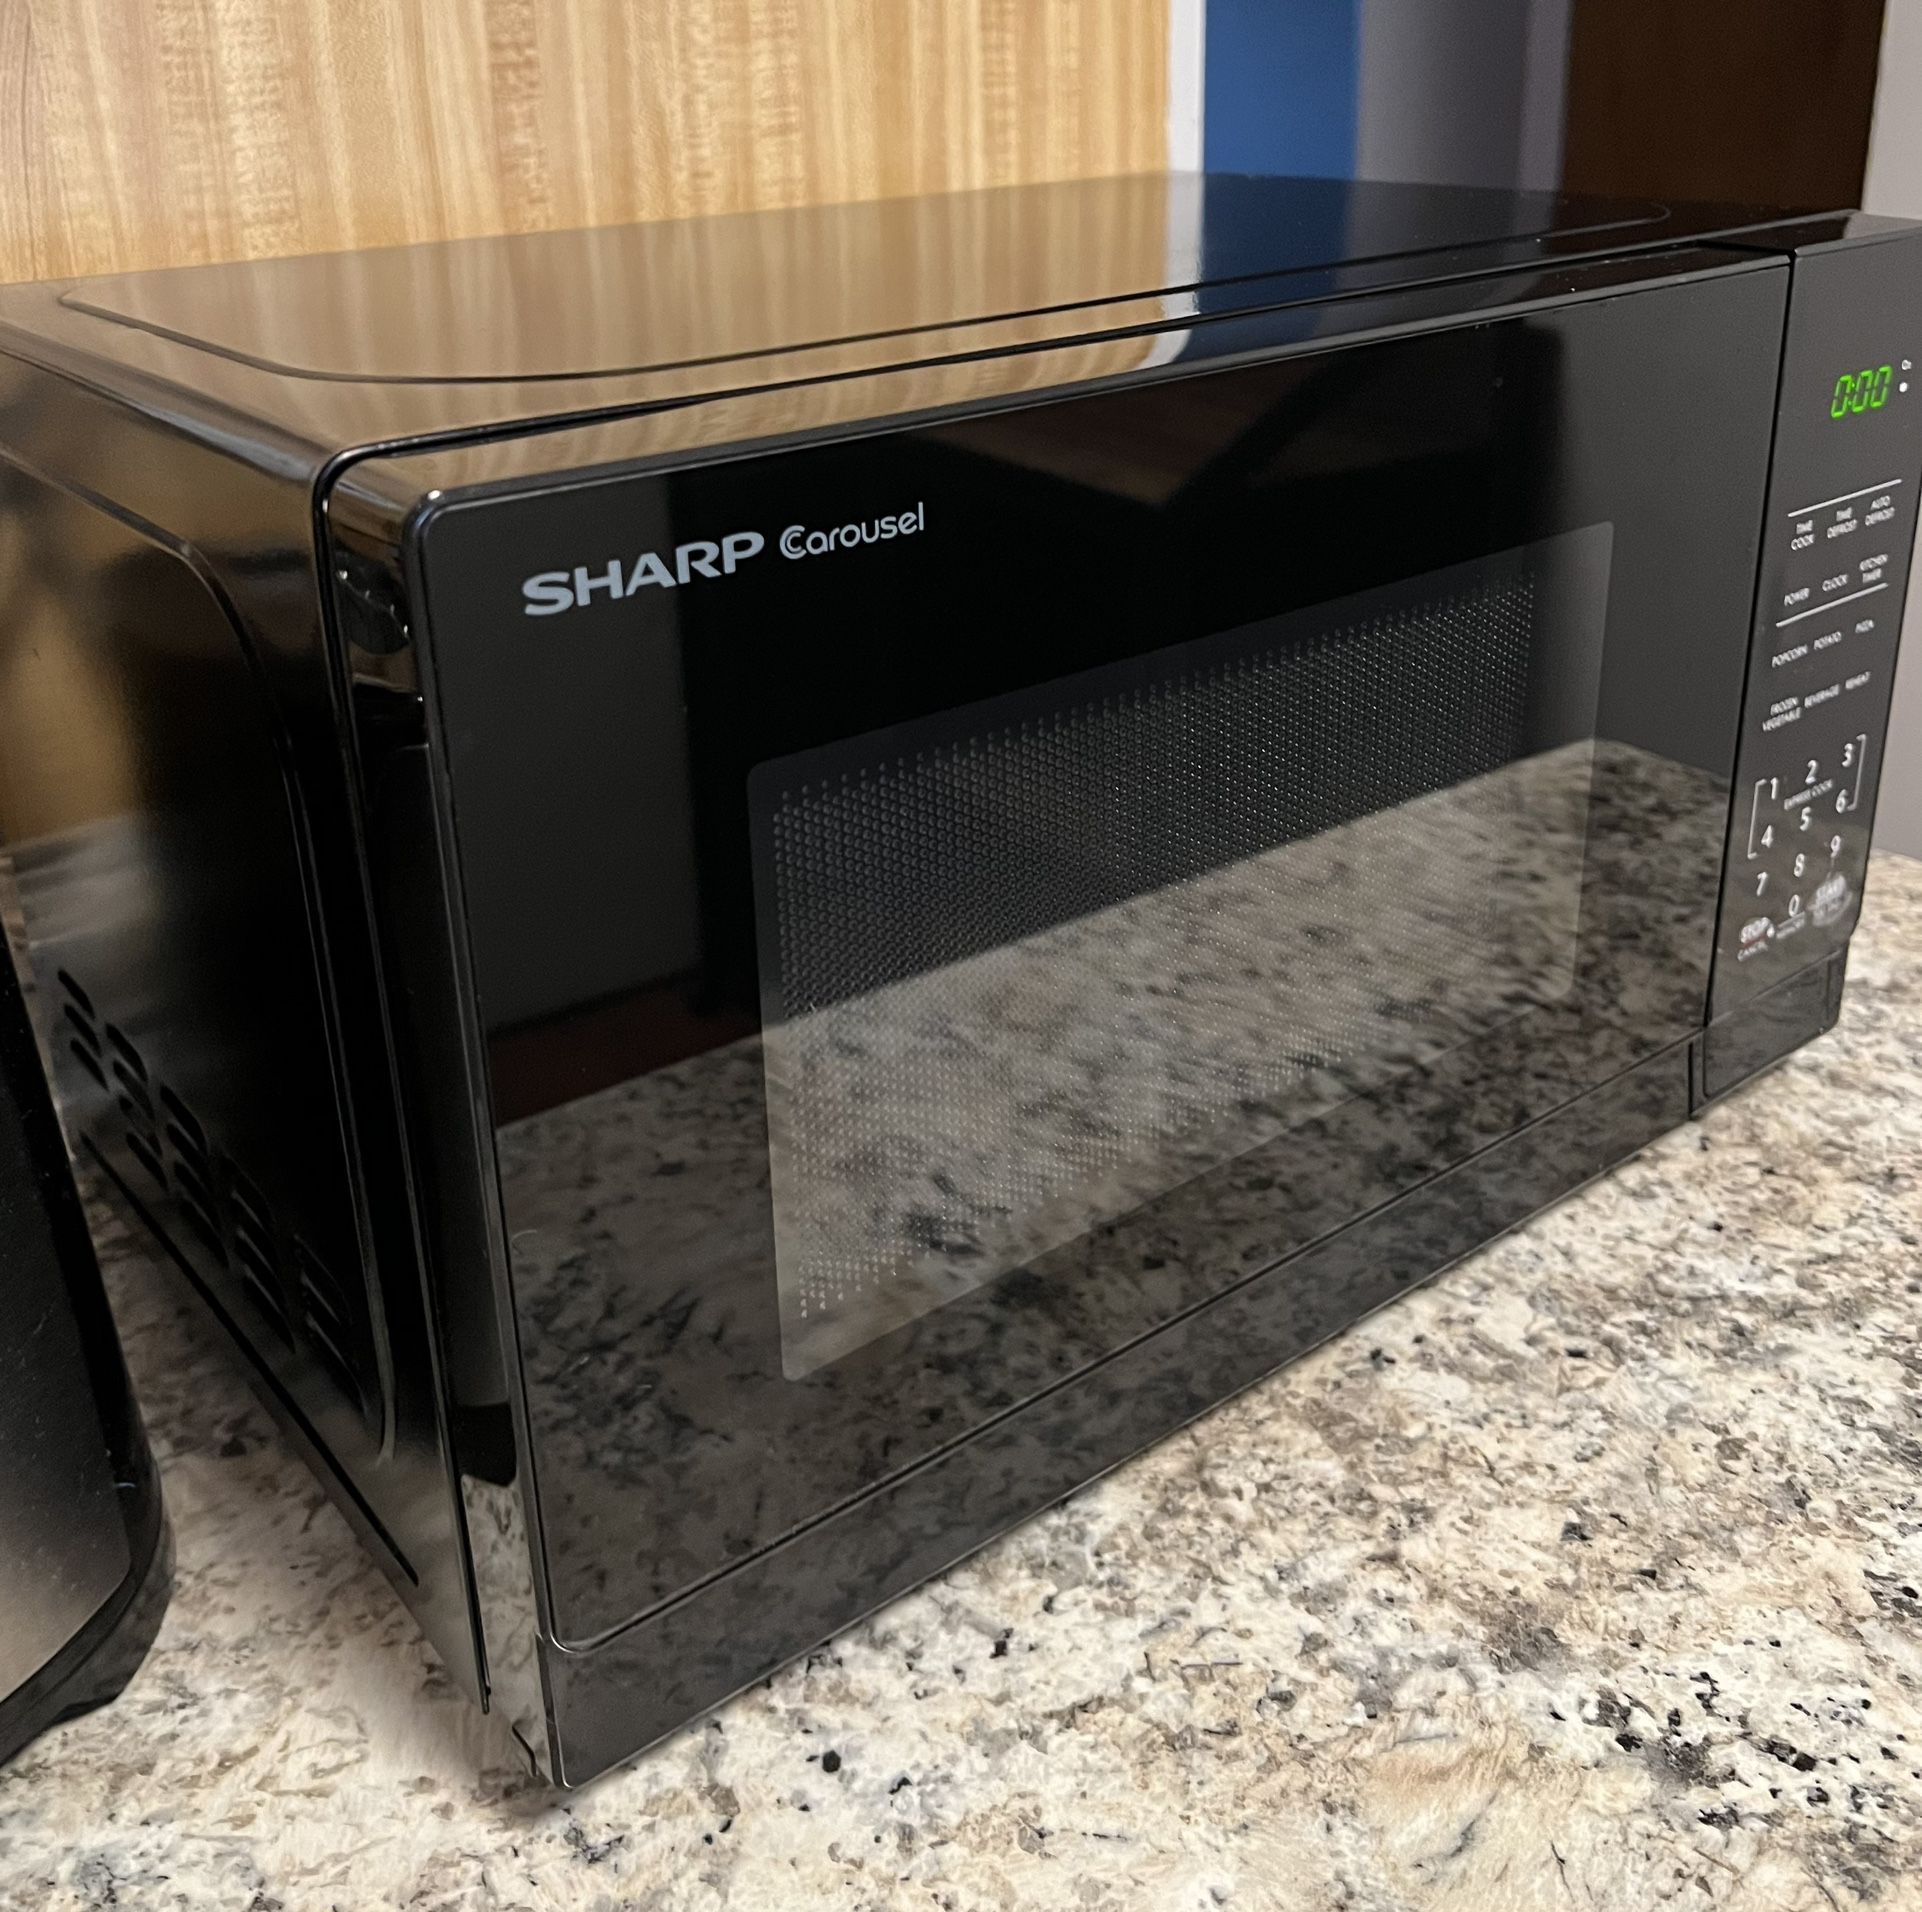 Insignia - 0.7 Cu. Ft. Compact Microwave - Black for Sale in New York, NY -  OfferUp